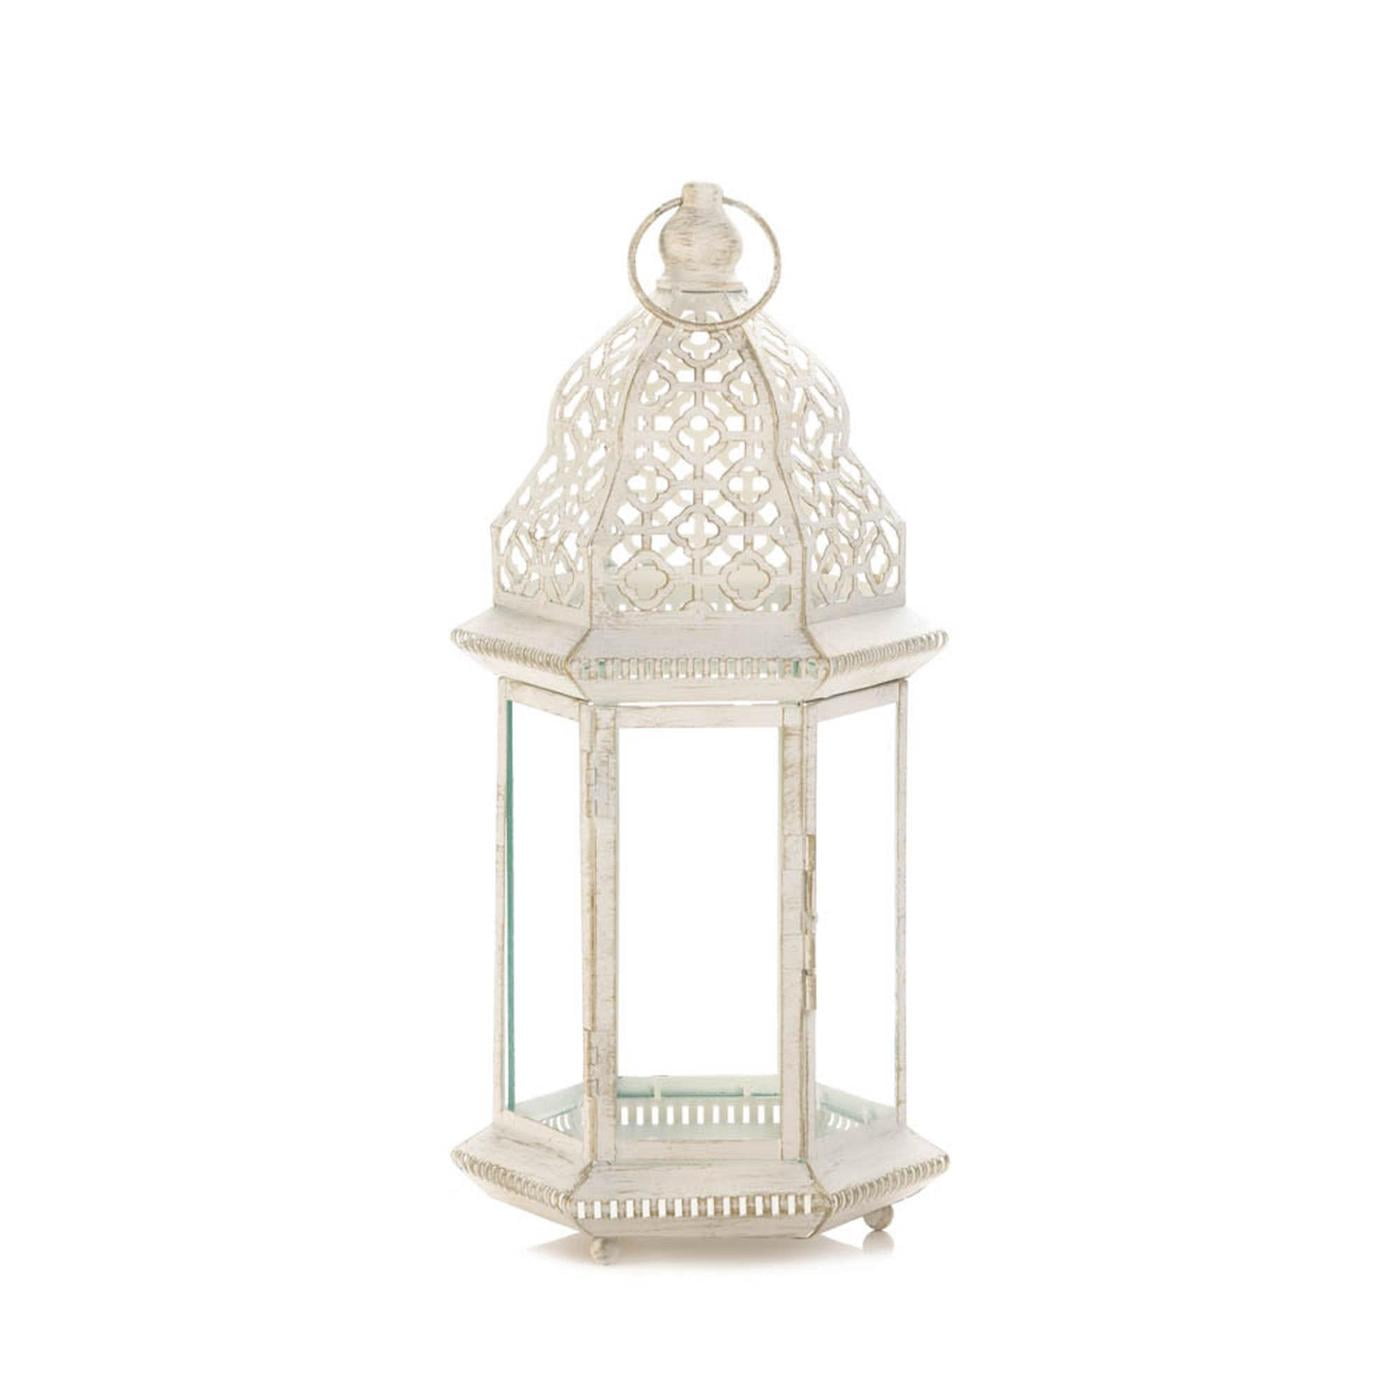 10 White Belfort Candle Lanterns with Floral Cutouts at Top Wedding Centerpieces 